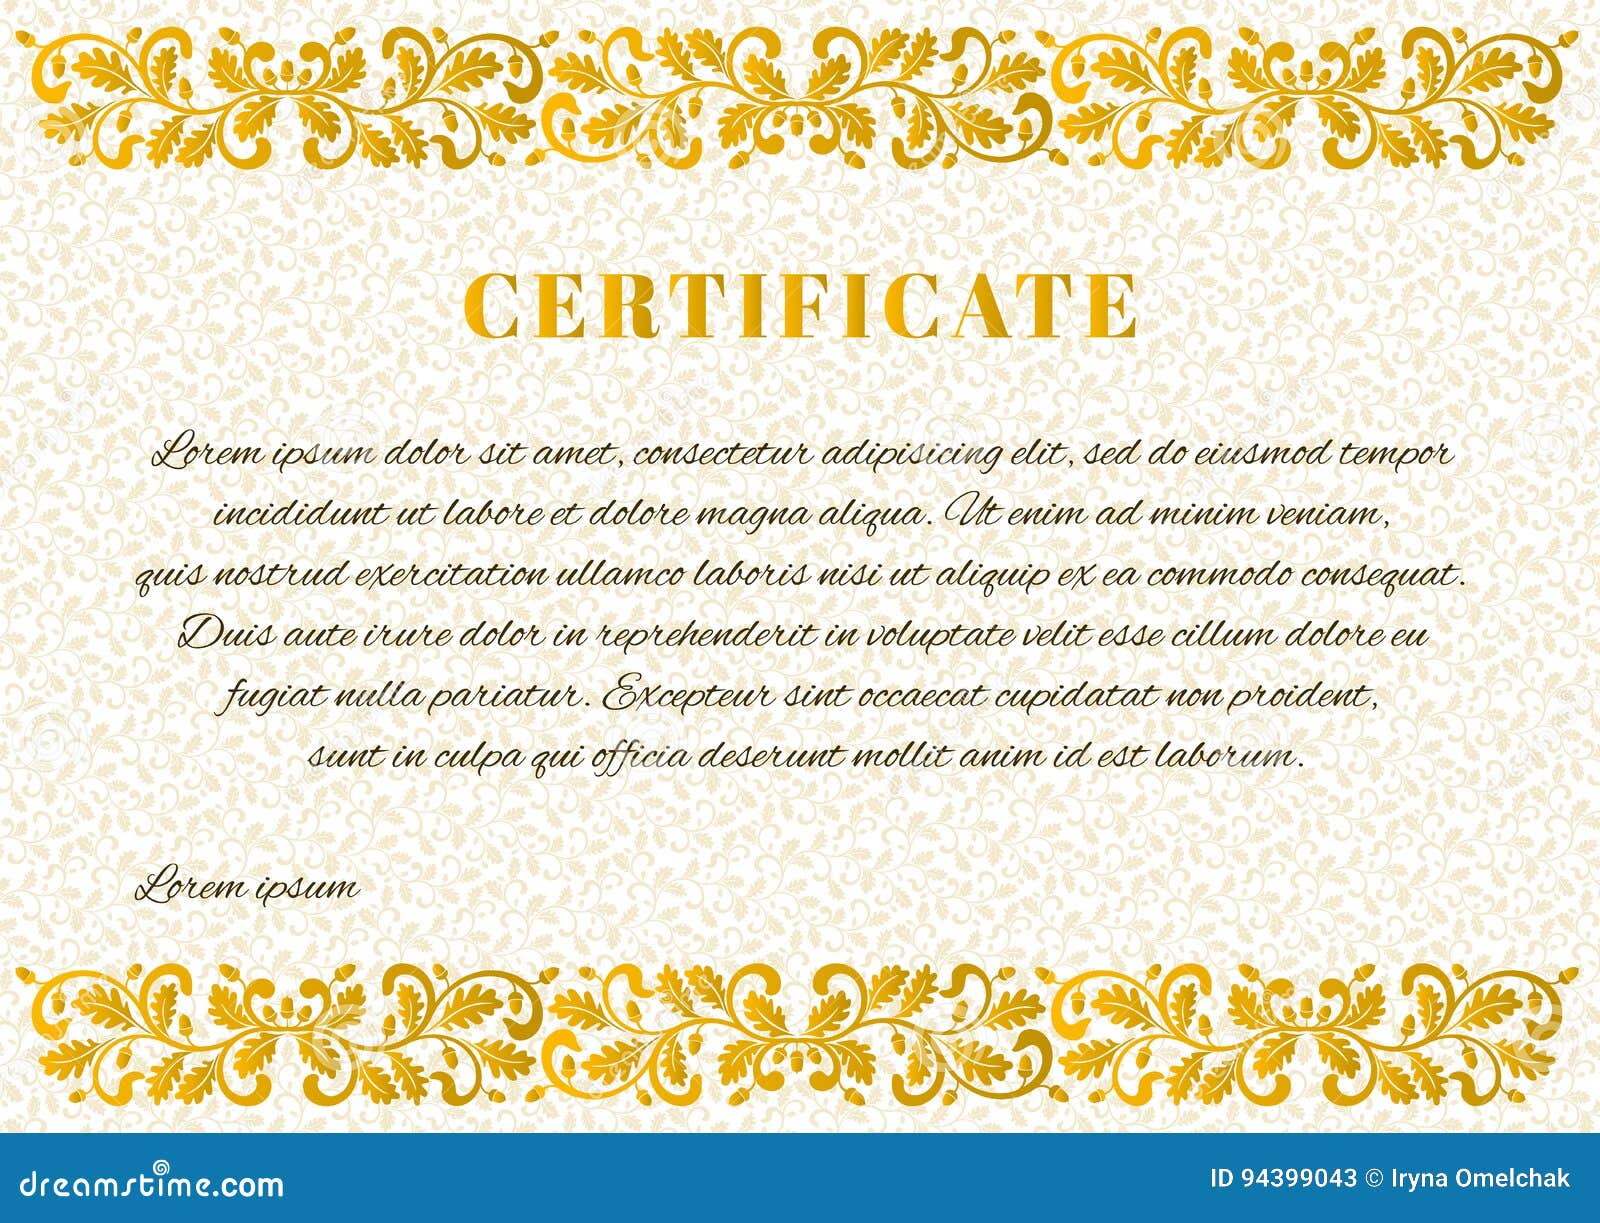 template for certificate with vegetal background and ornate frame.